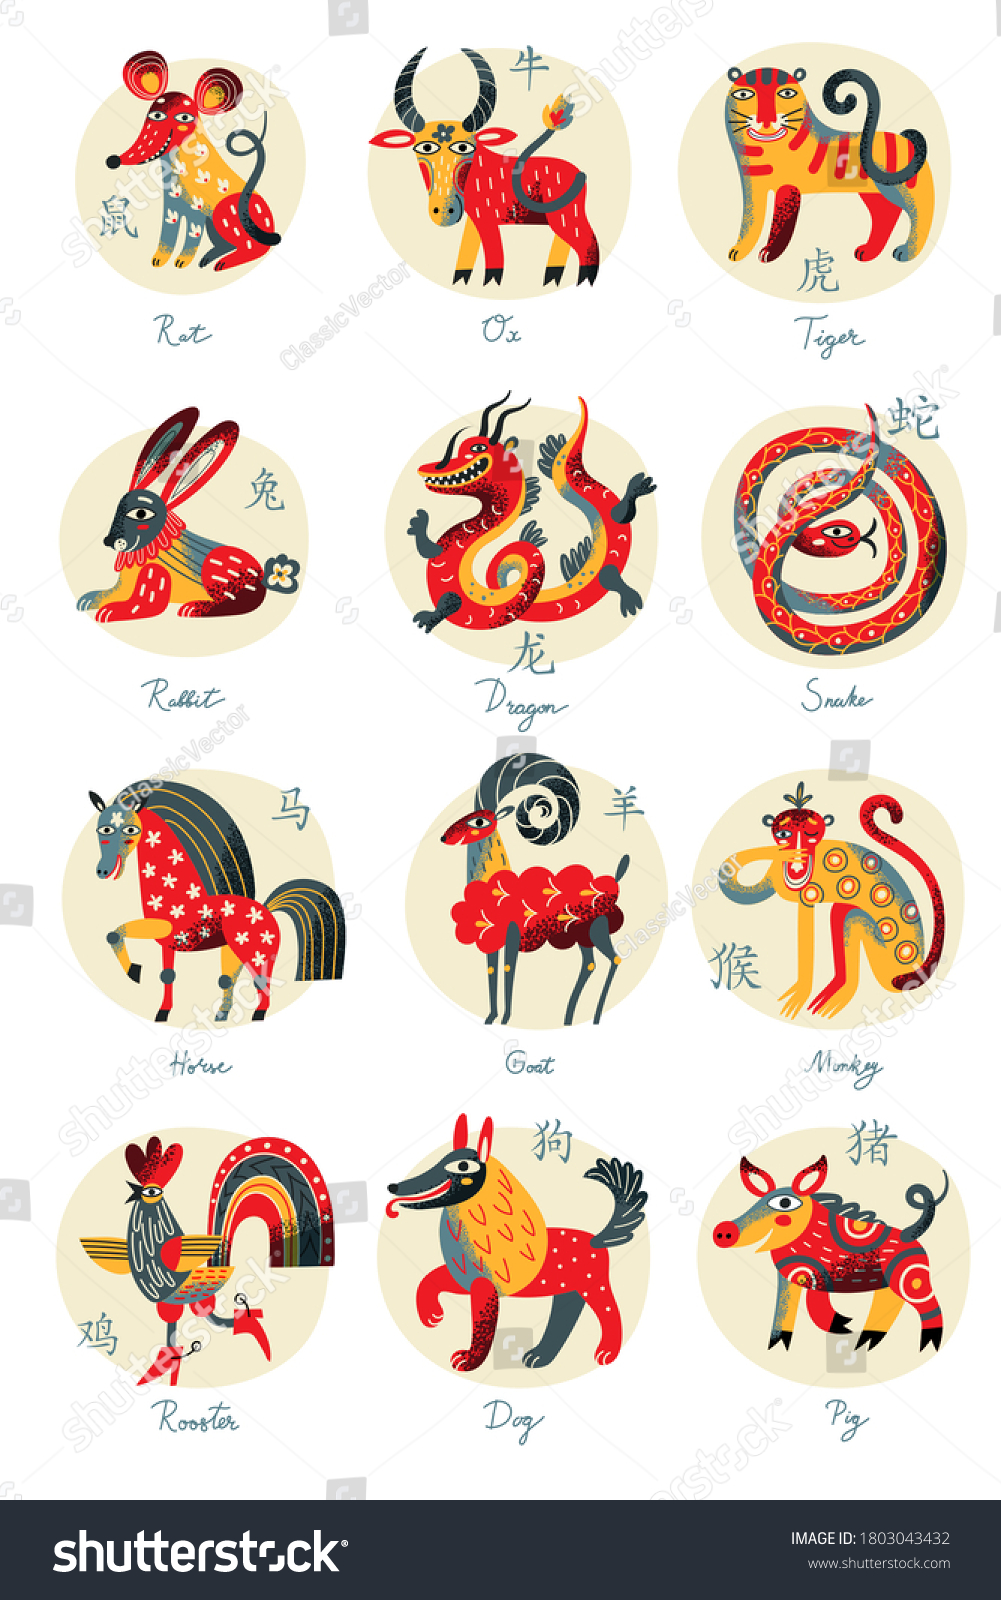 SVG of Cute chinese horoscope zodiac set. Collection of animals symbols of year. China New Year mascots isolated on white background. Vector illustration of calendar astrological signs on circle stamps svg